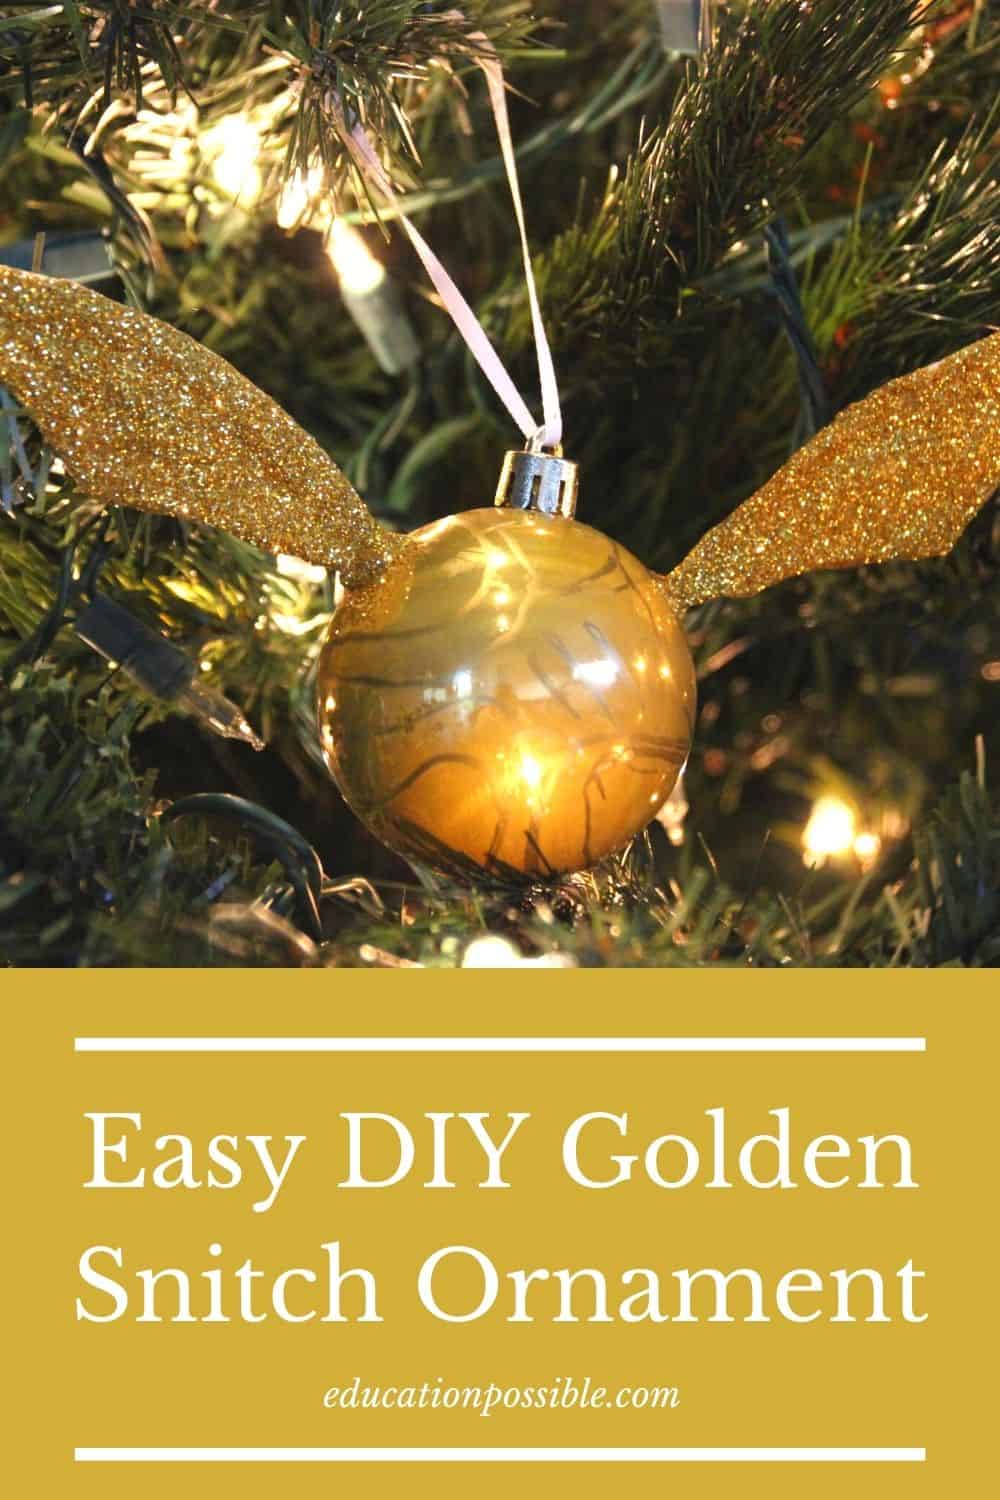 Homemade golden snitch ornament hanging on a Christmas tree.